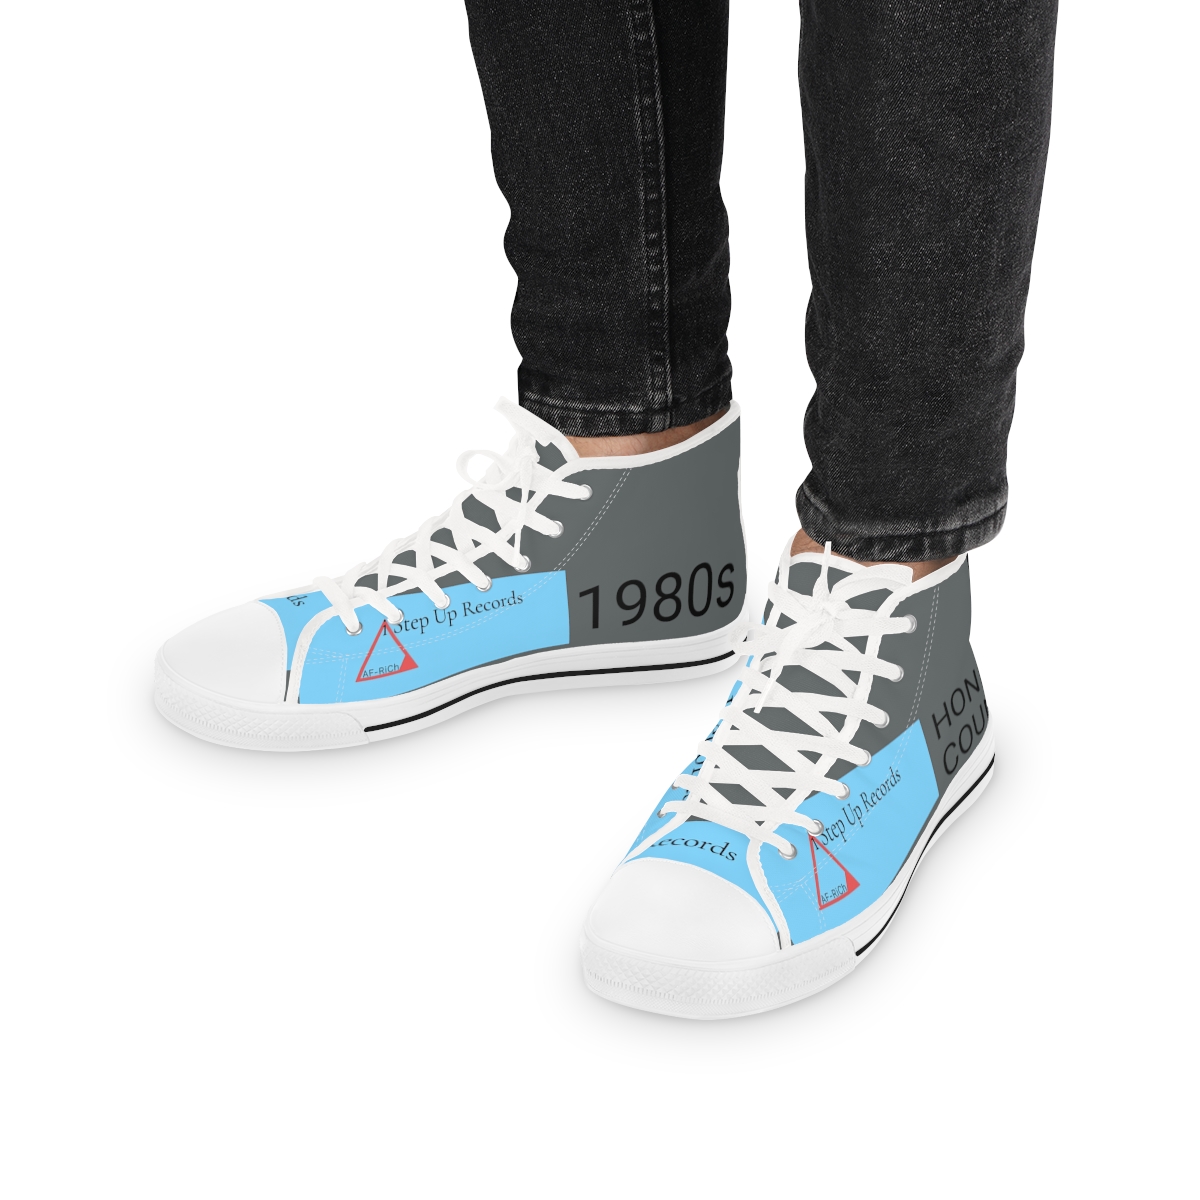 Men's High Top Sneakers product thumbnail image